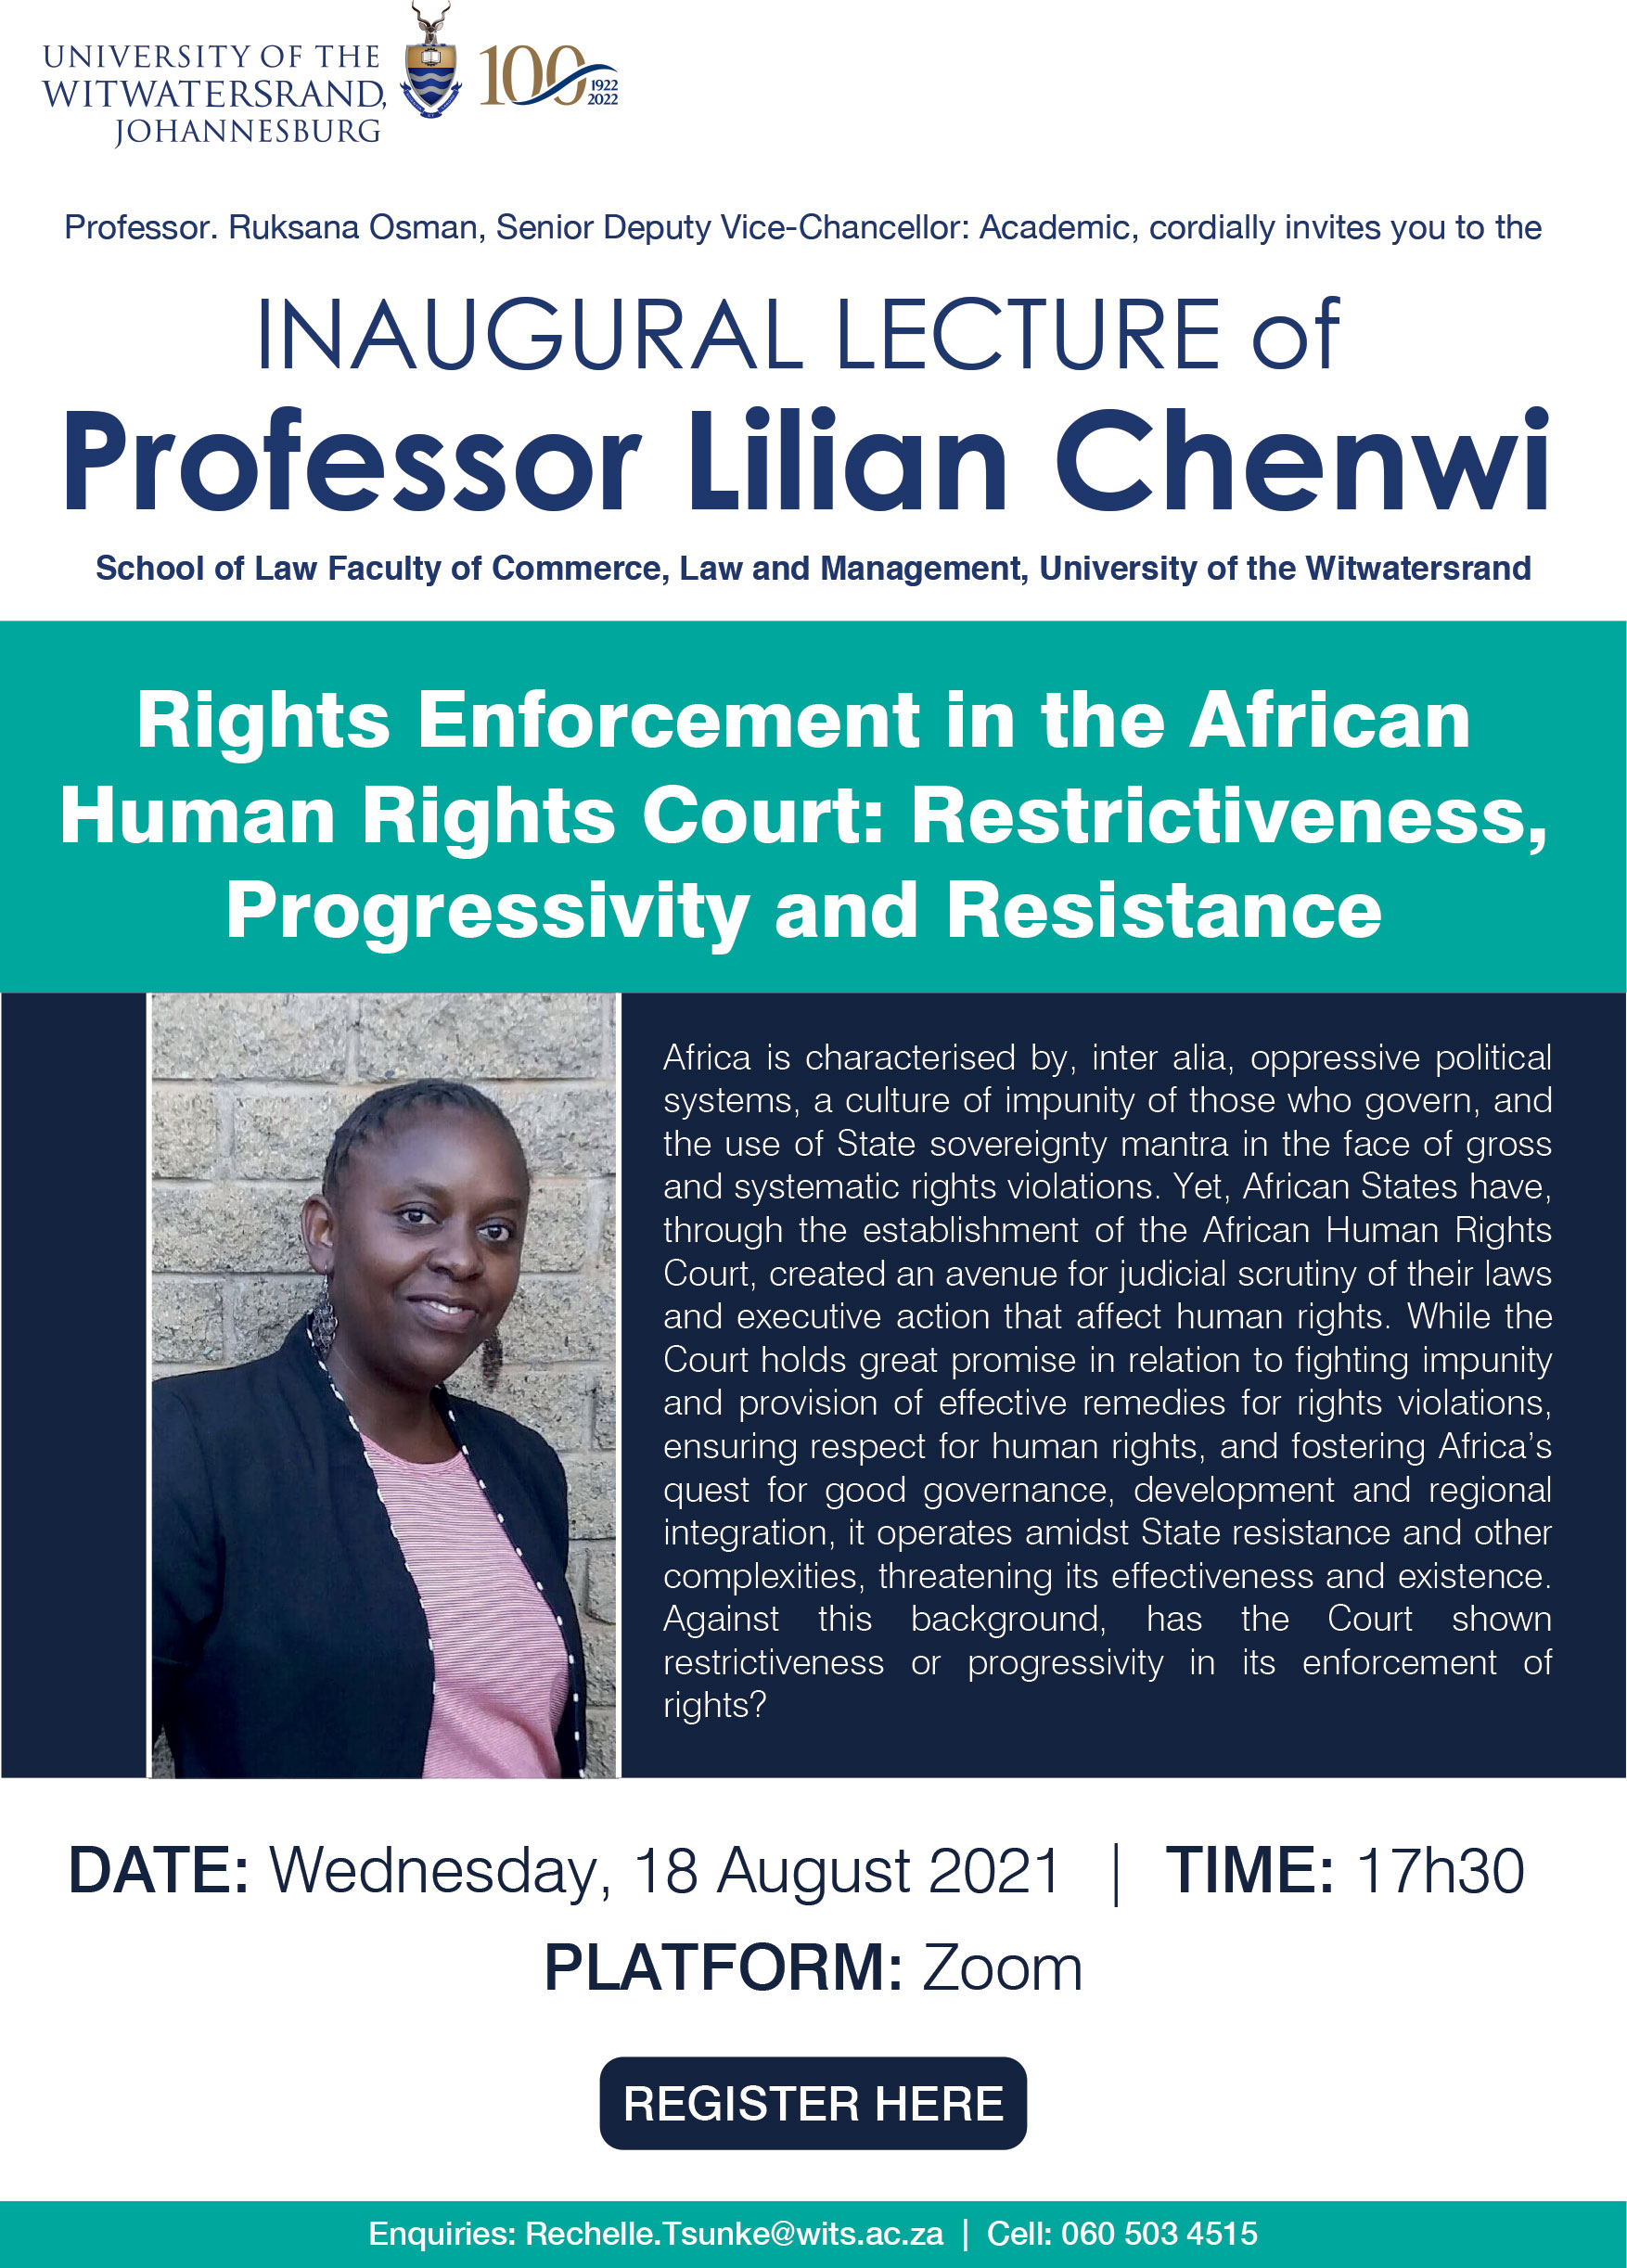 Rights Enforcement in the African Human Rights Court: Restrictiveness, Progressivity and Resistance by Professor Lilian Chenwi